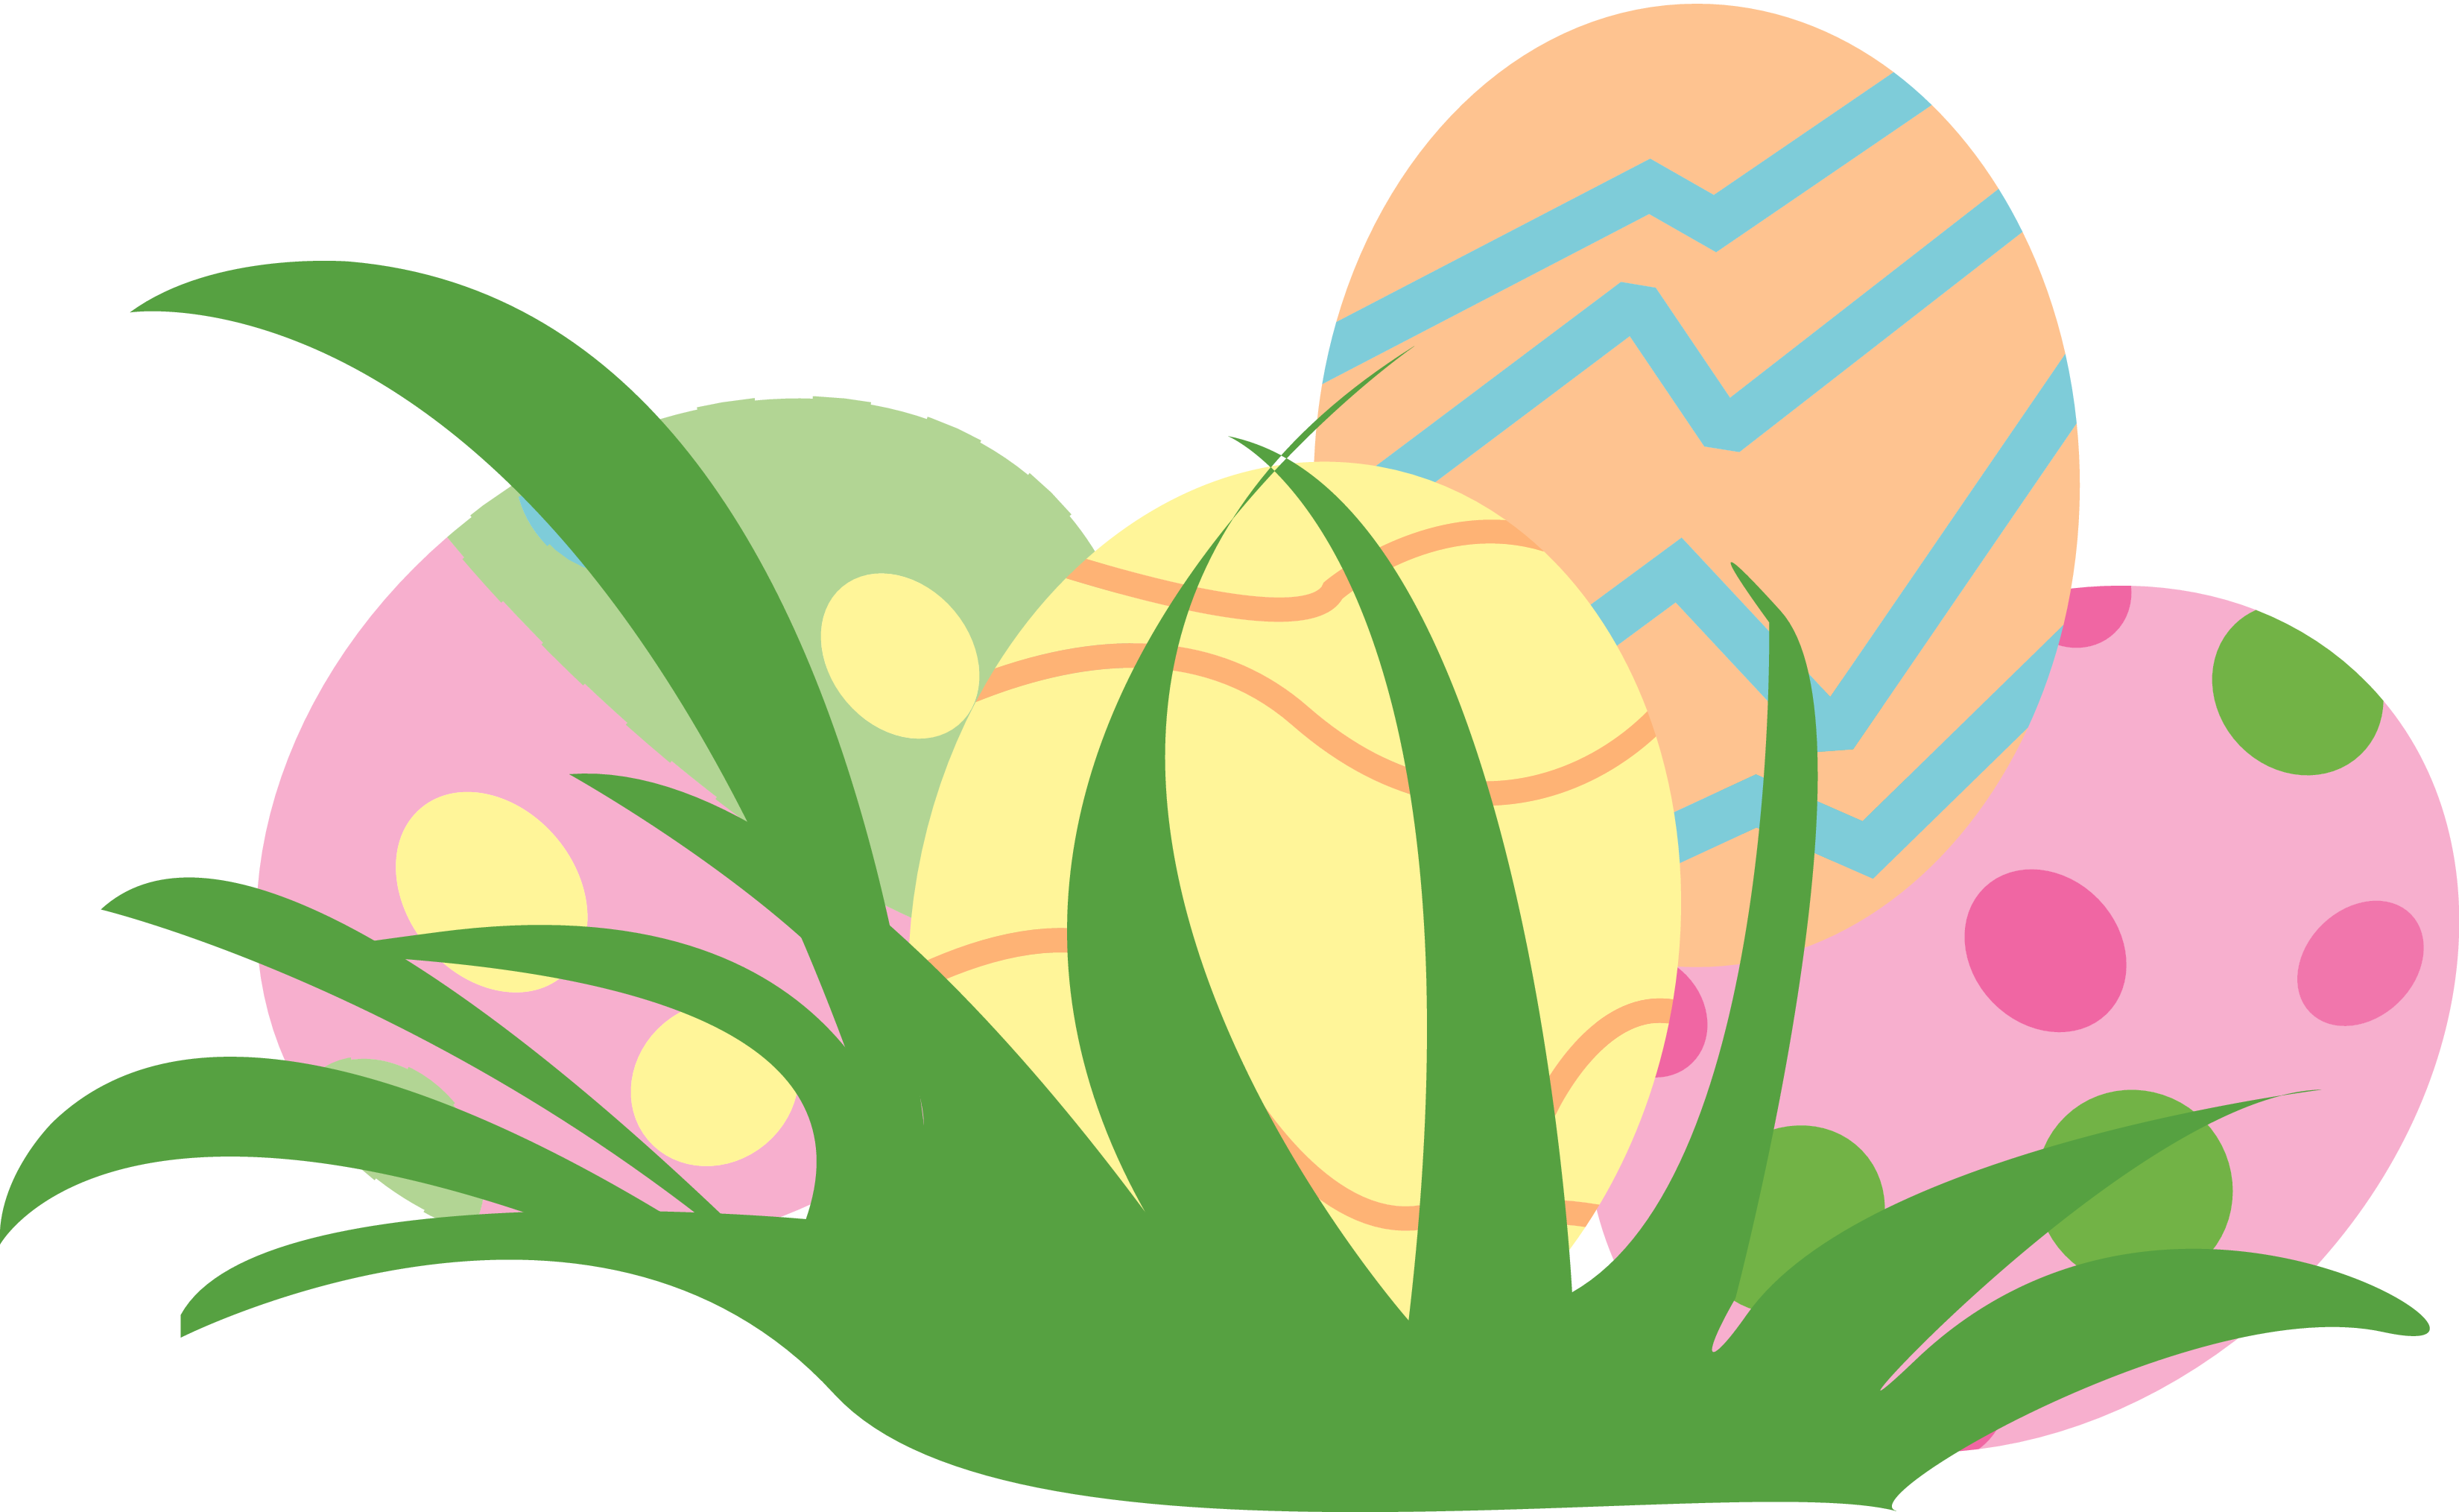 free easter clipart easter .